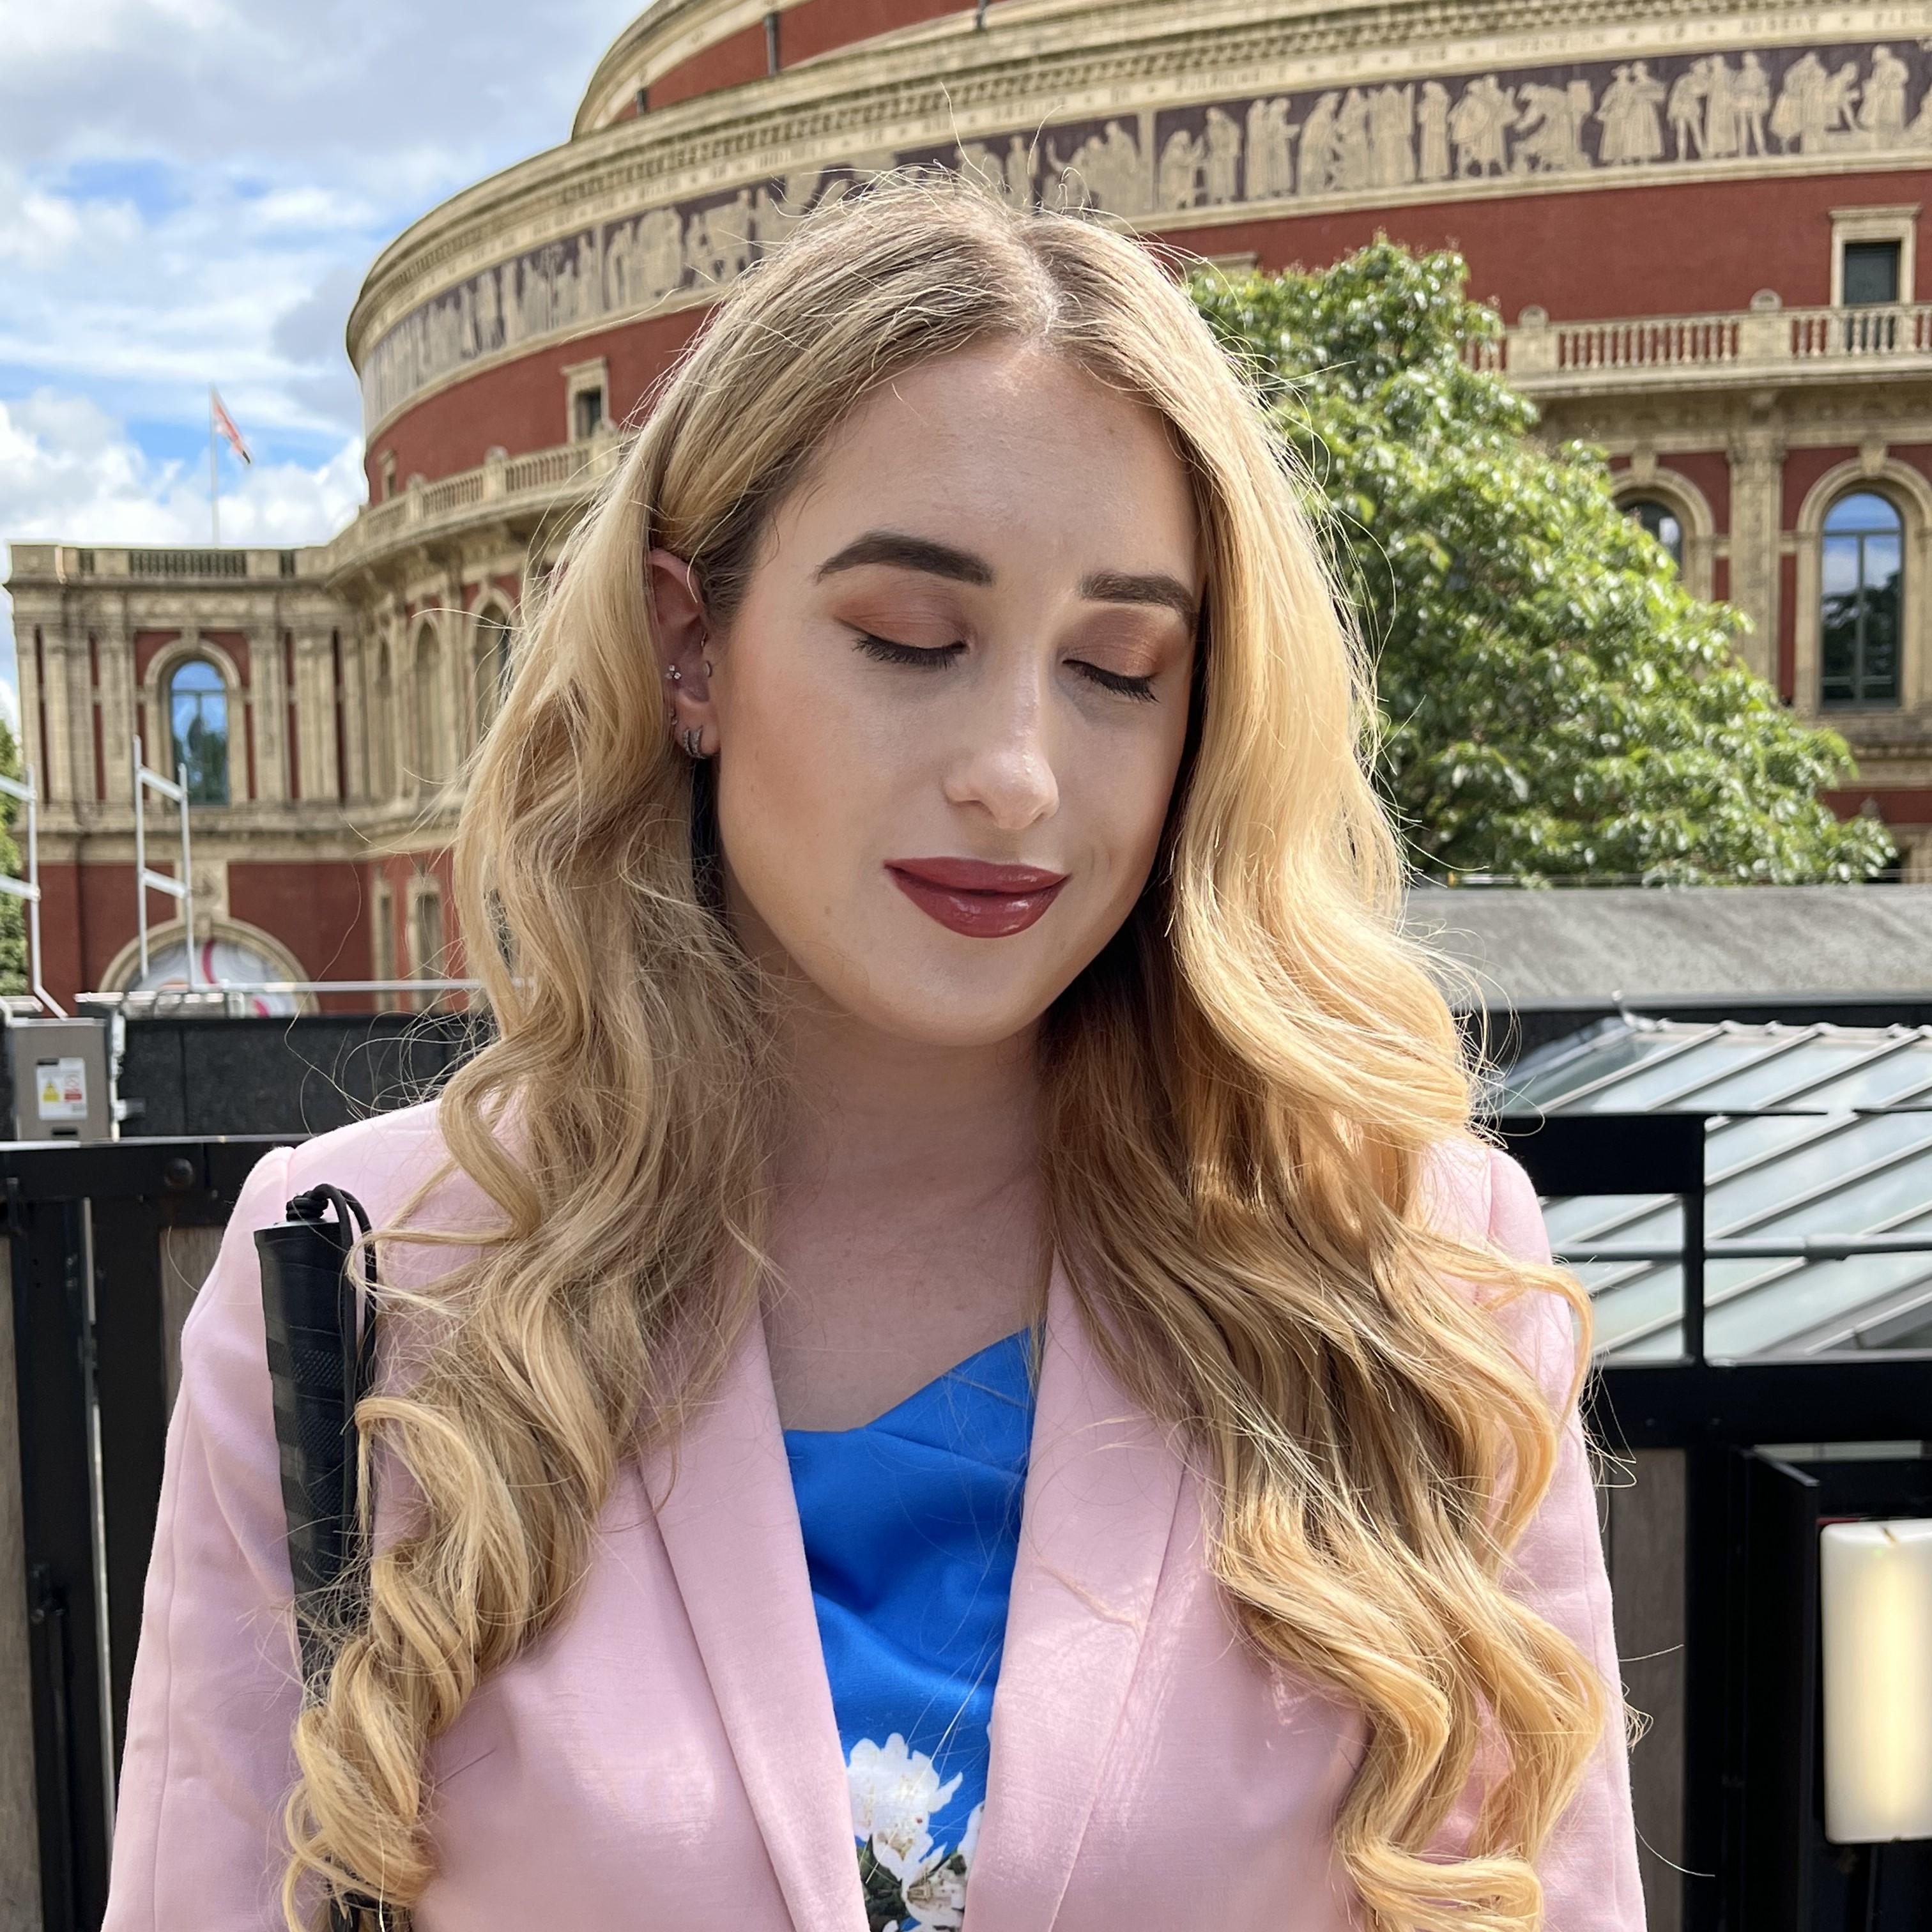 A photograph of Kimberley stood in front of the Royal Albert Hall